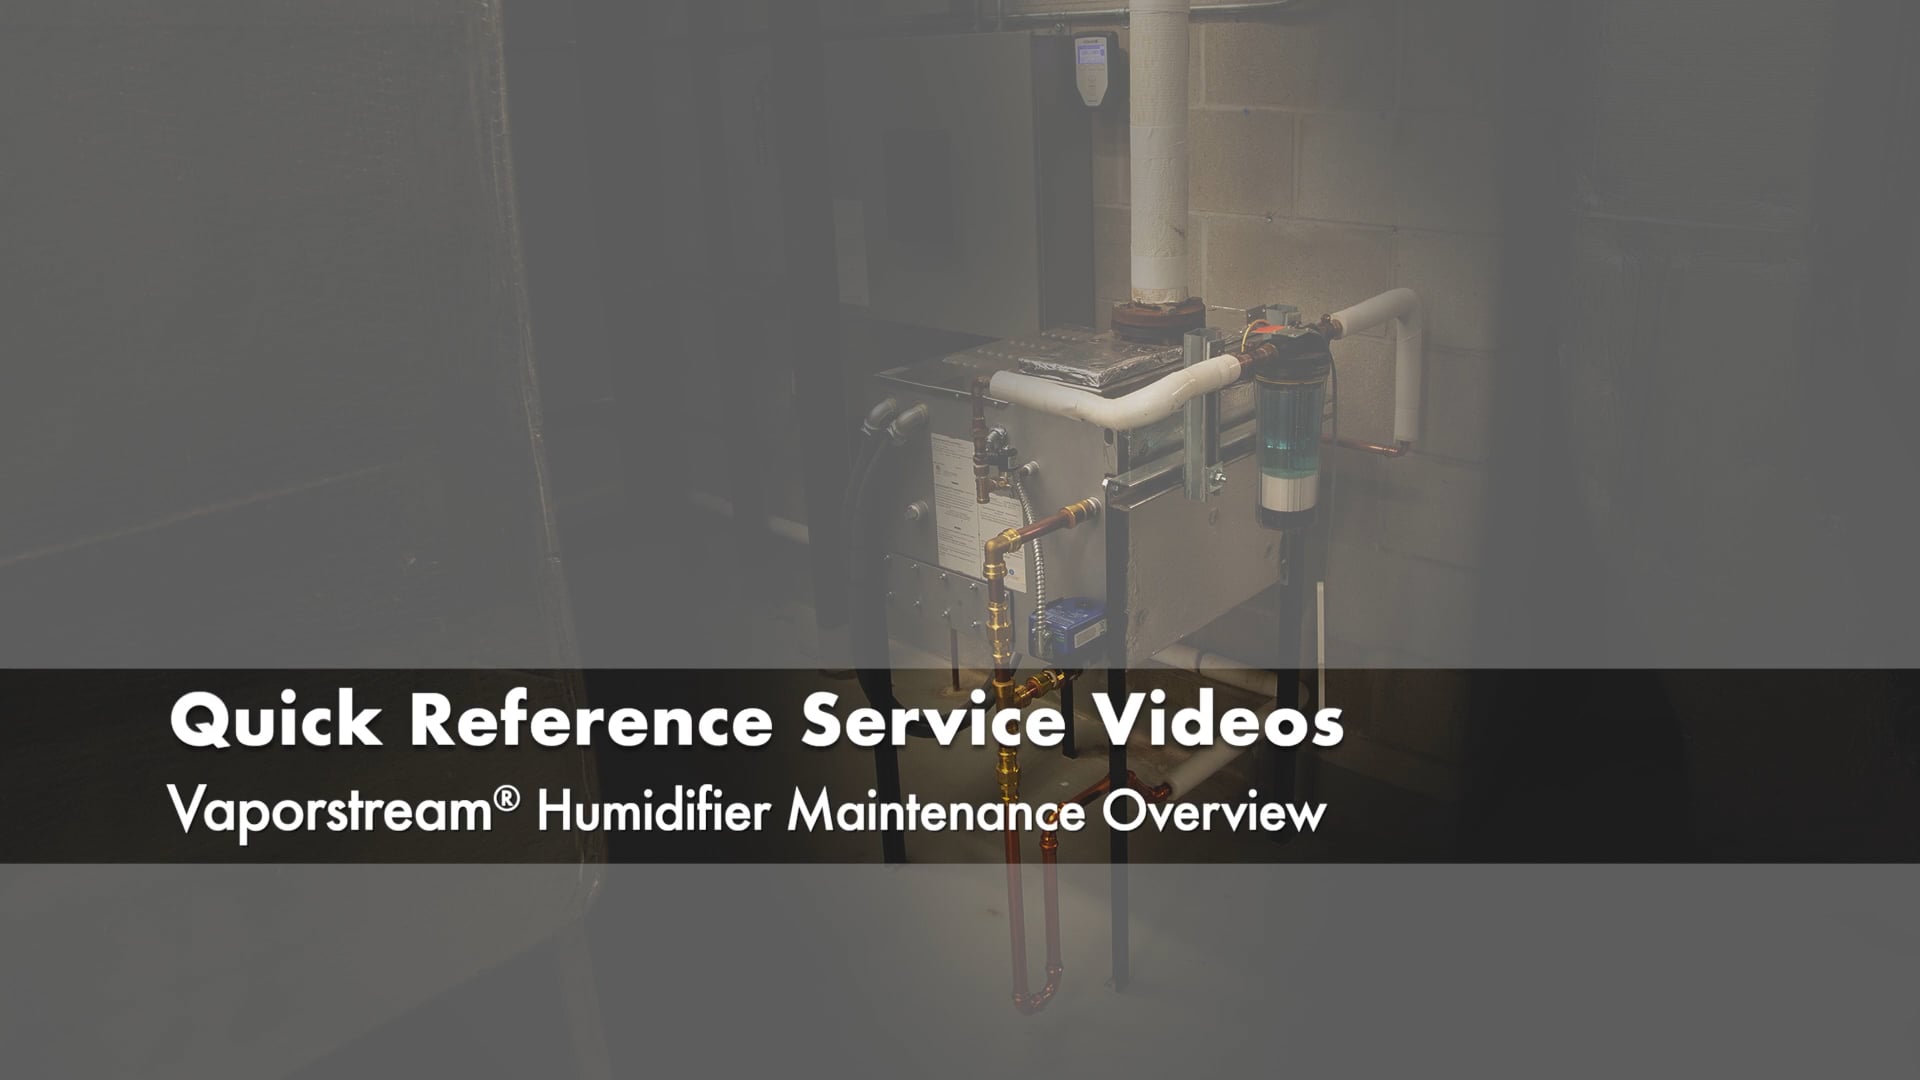 Prepare to run schedule maintenance on a Vaporstream electric humidifier by knowing what to expect in terms of tools, consumables, and time commitment. Learn also how to determine service intervals based on water type and the appearance of the tank and heaters.